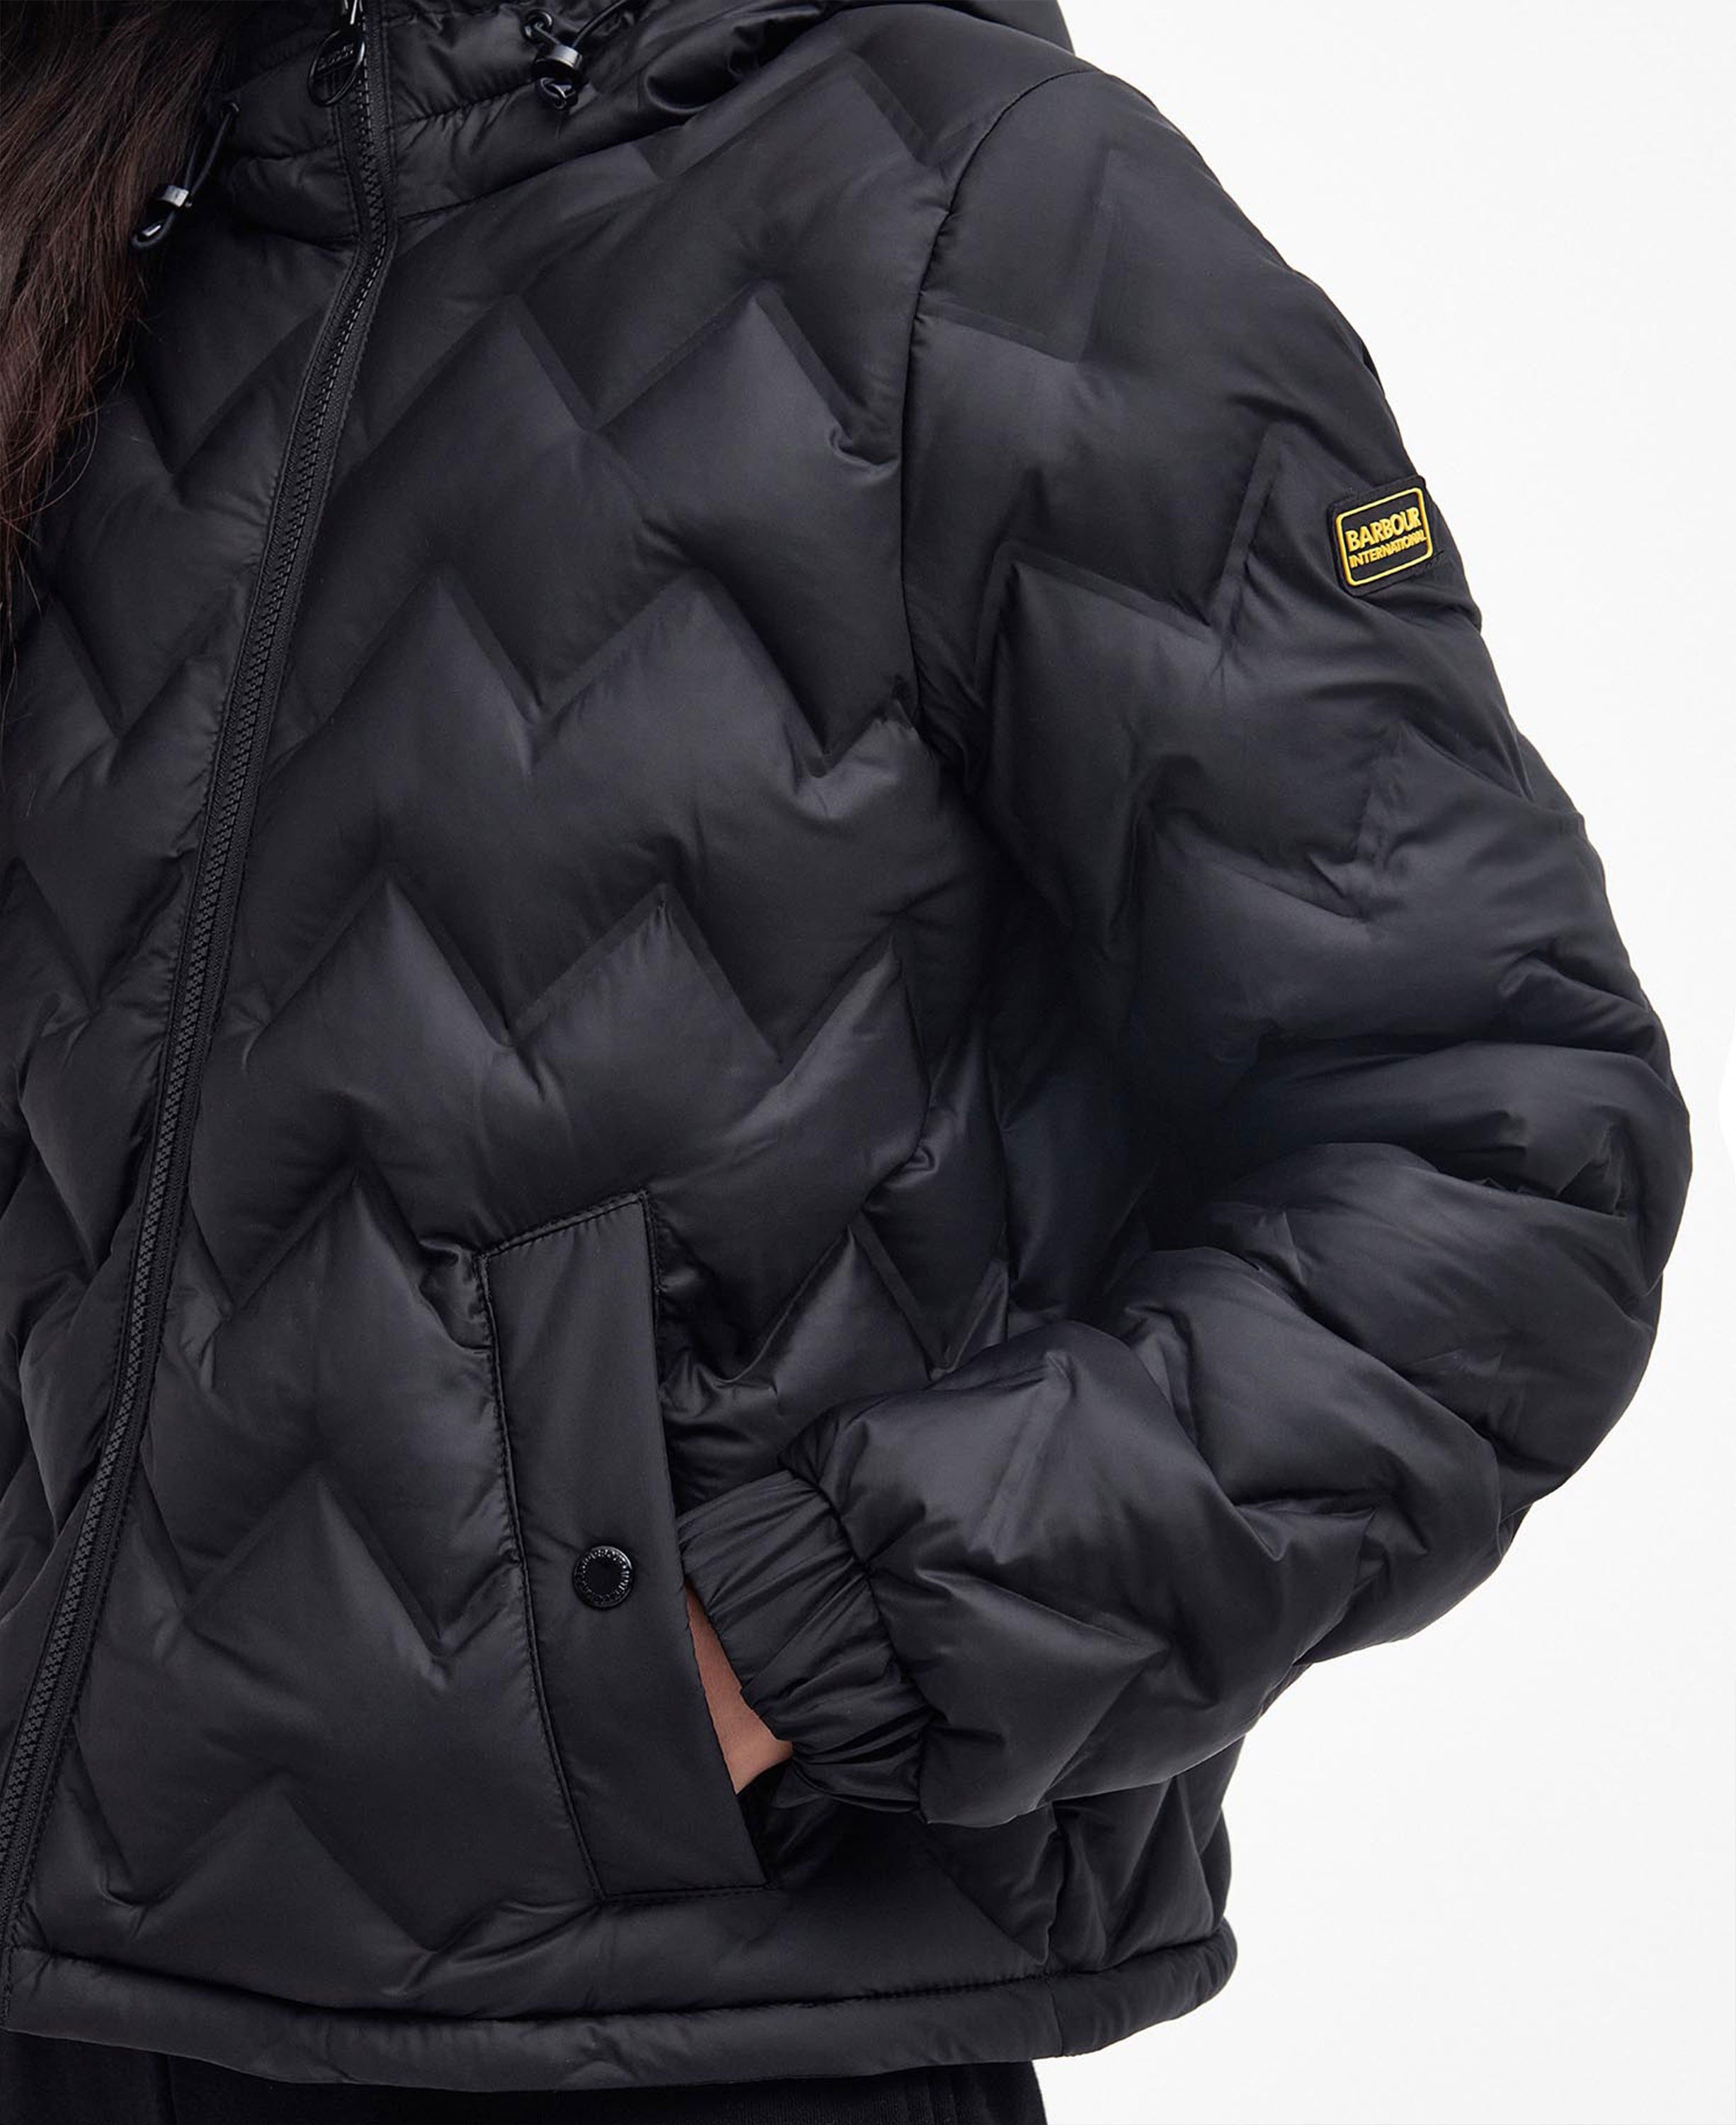 Smith Quilted Jacket - Black